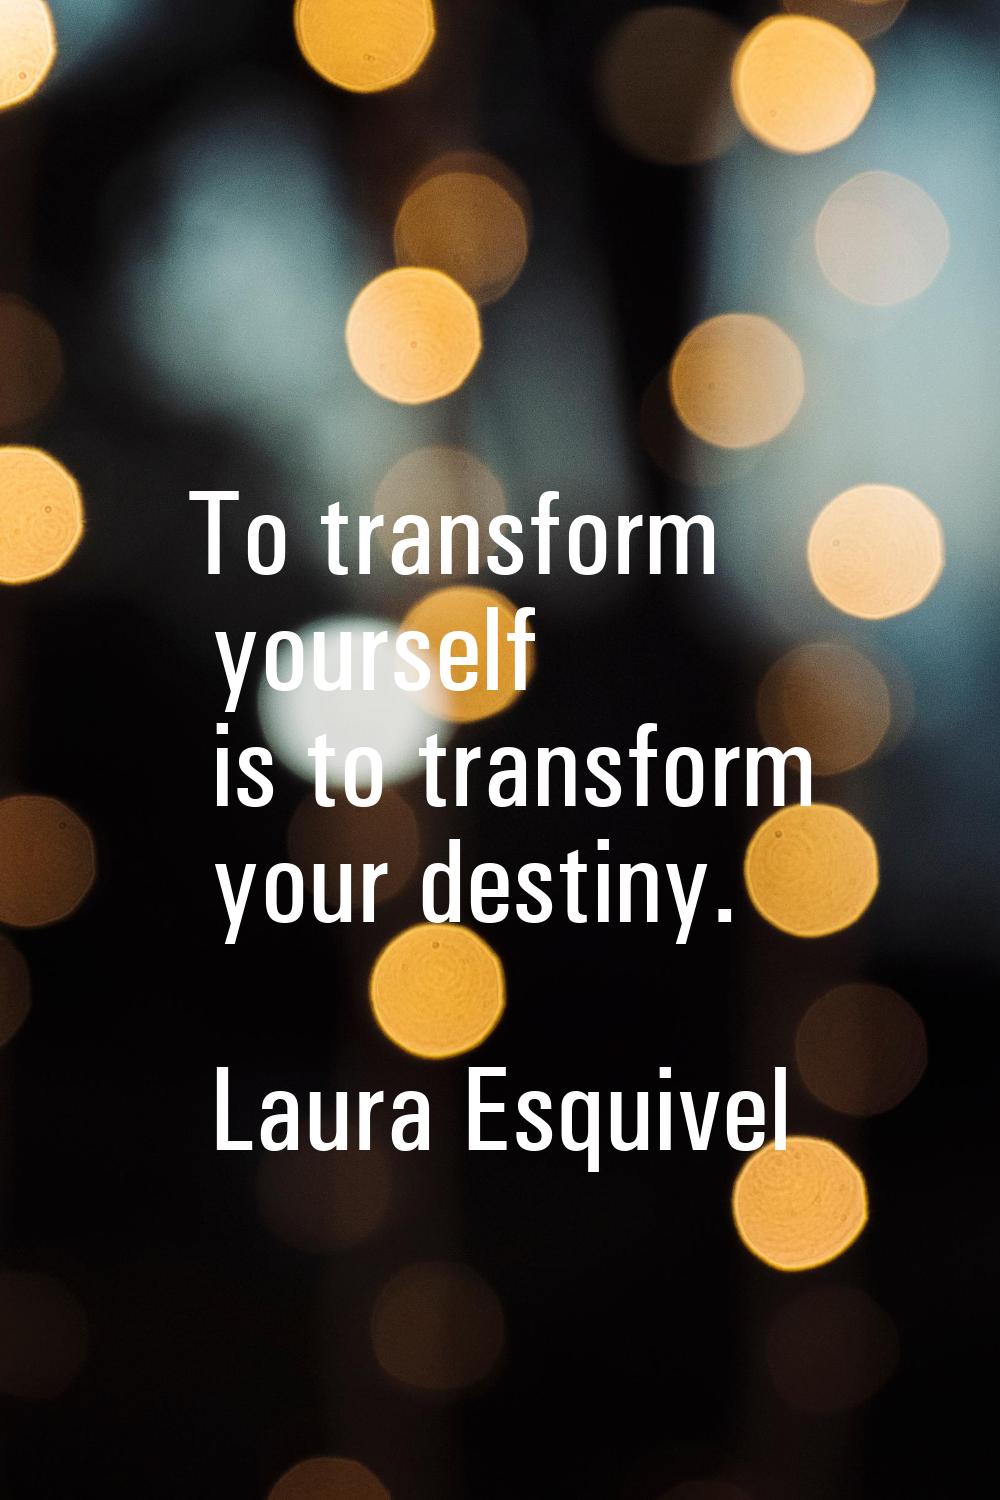 To transform yourself is to transform your destiny.